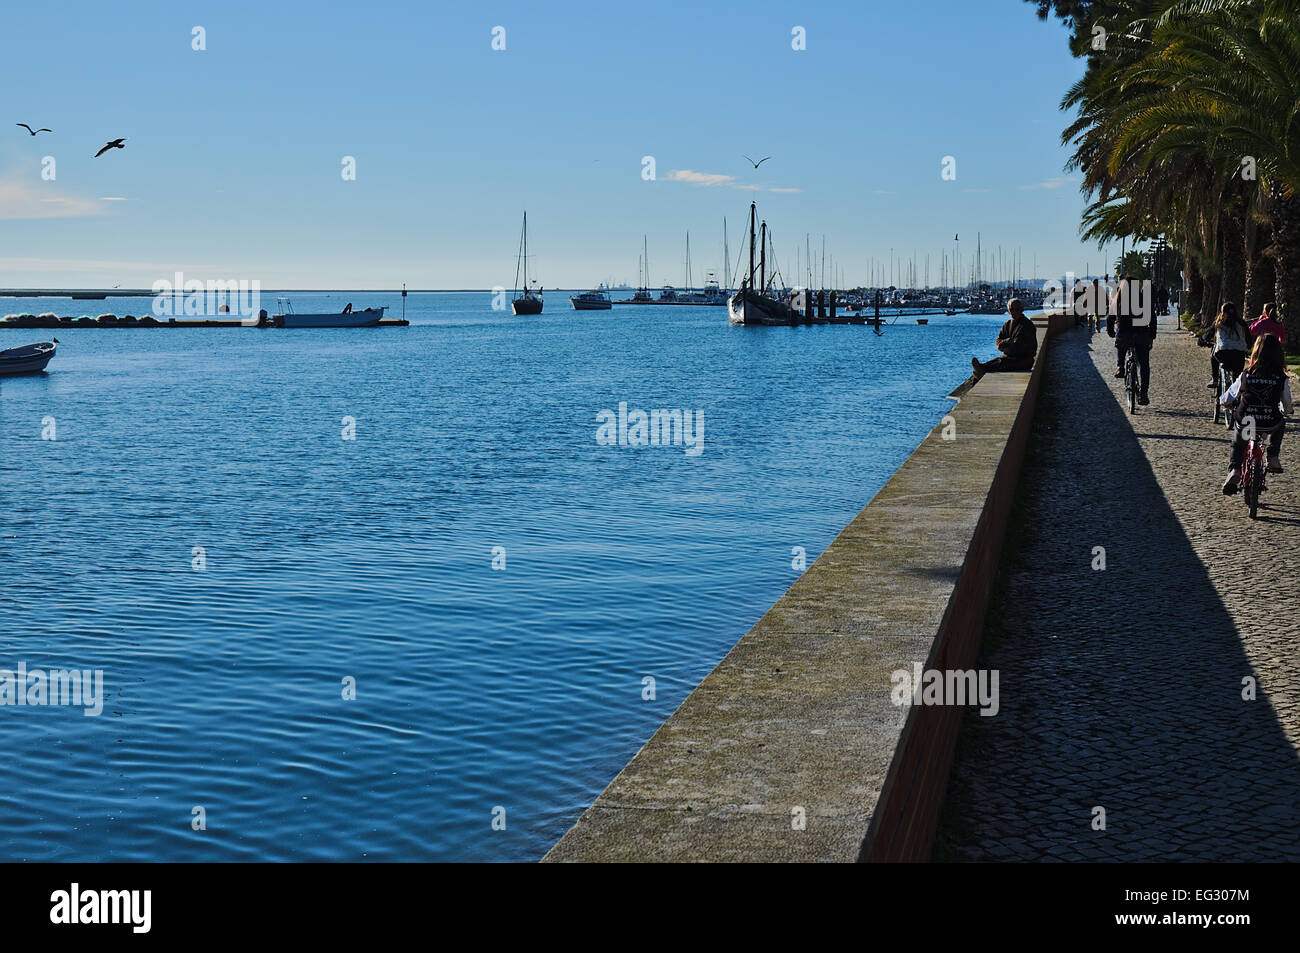 Olhao's city center. Boats and people passing by. Algarve, Portugal Stock Photo